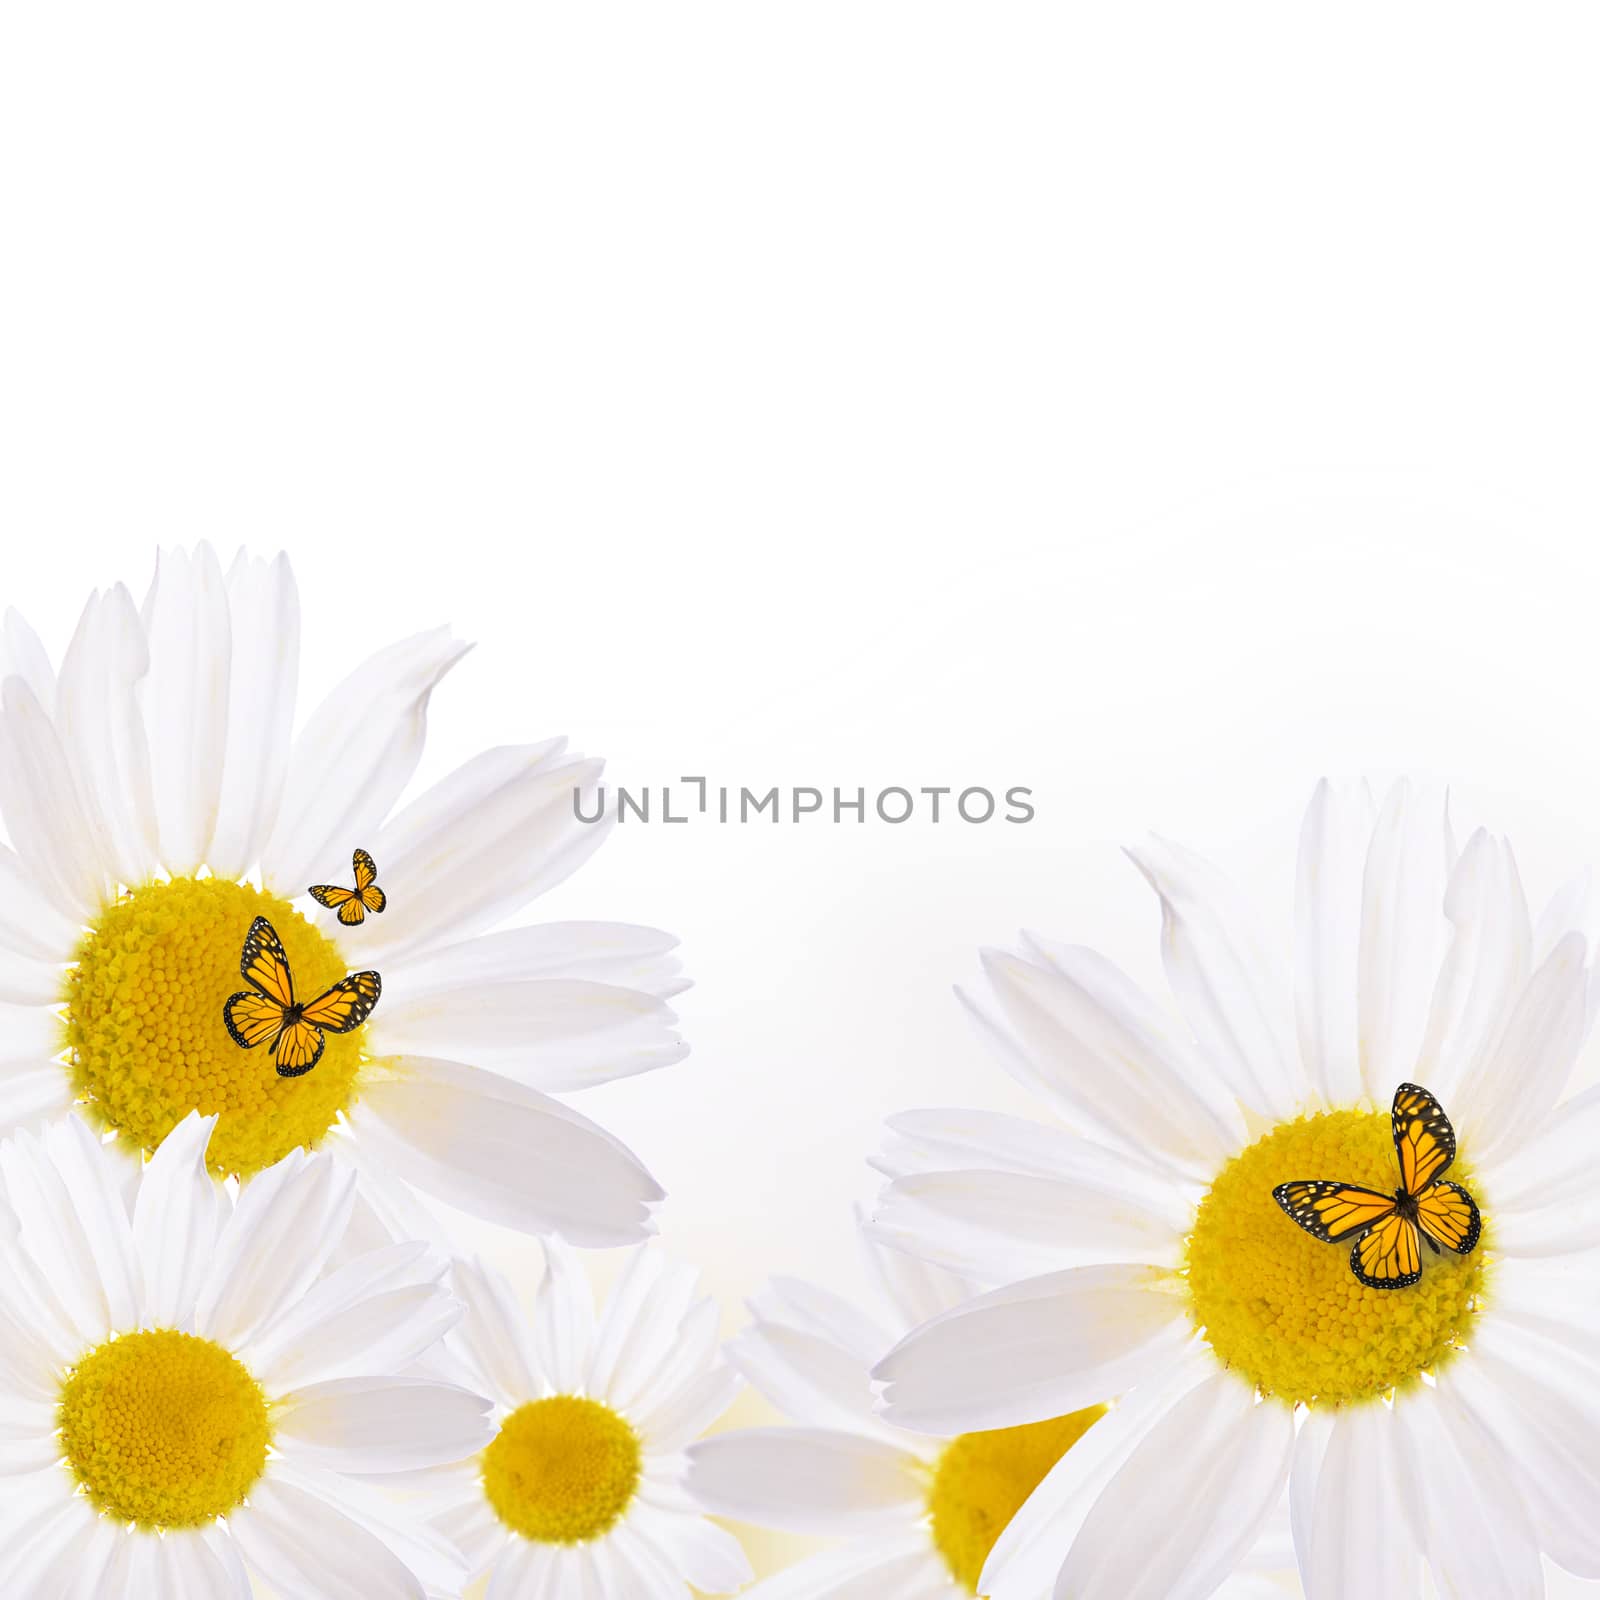 The beautiful daisy isolated on white background